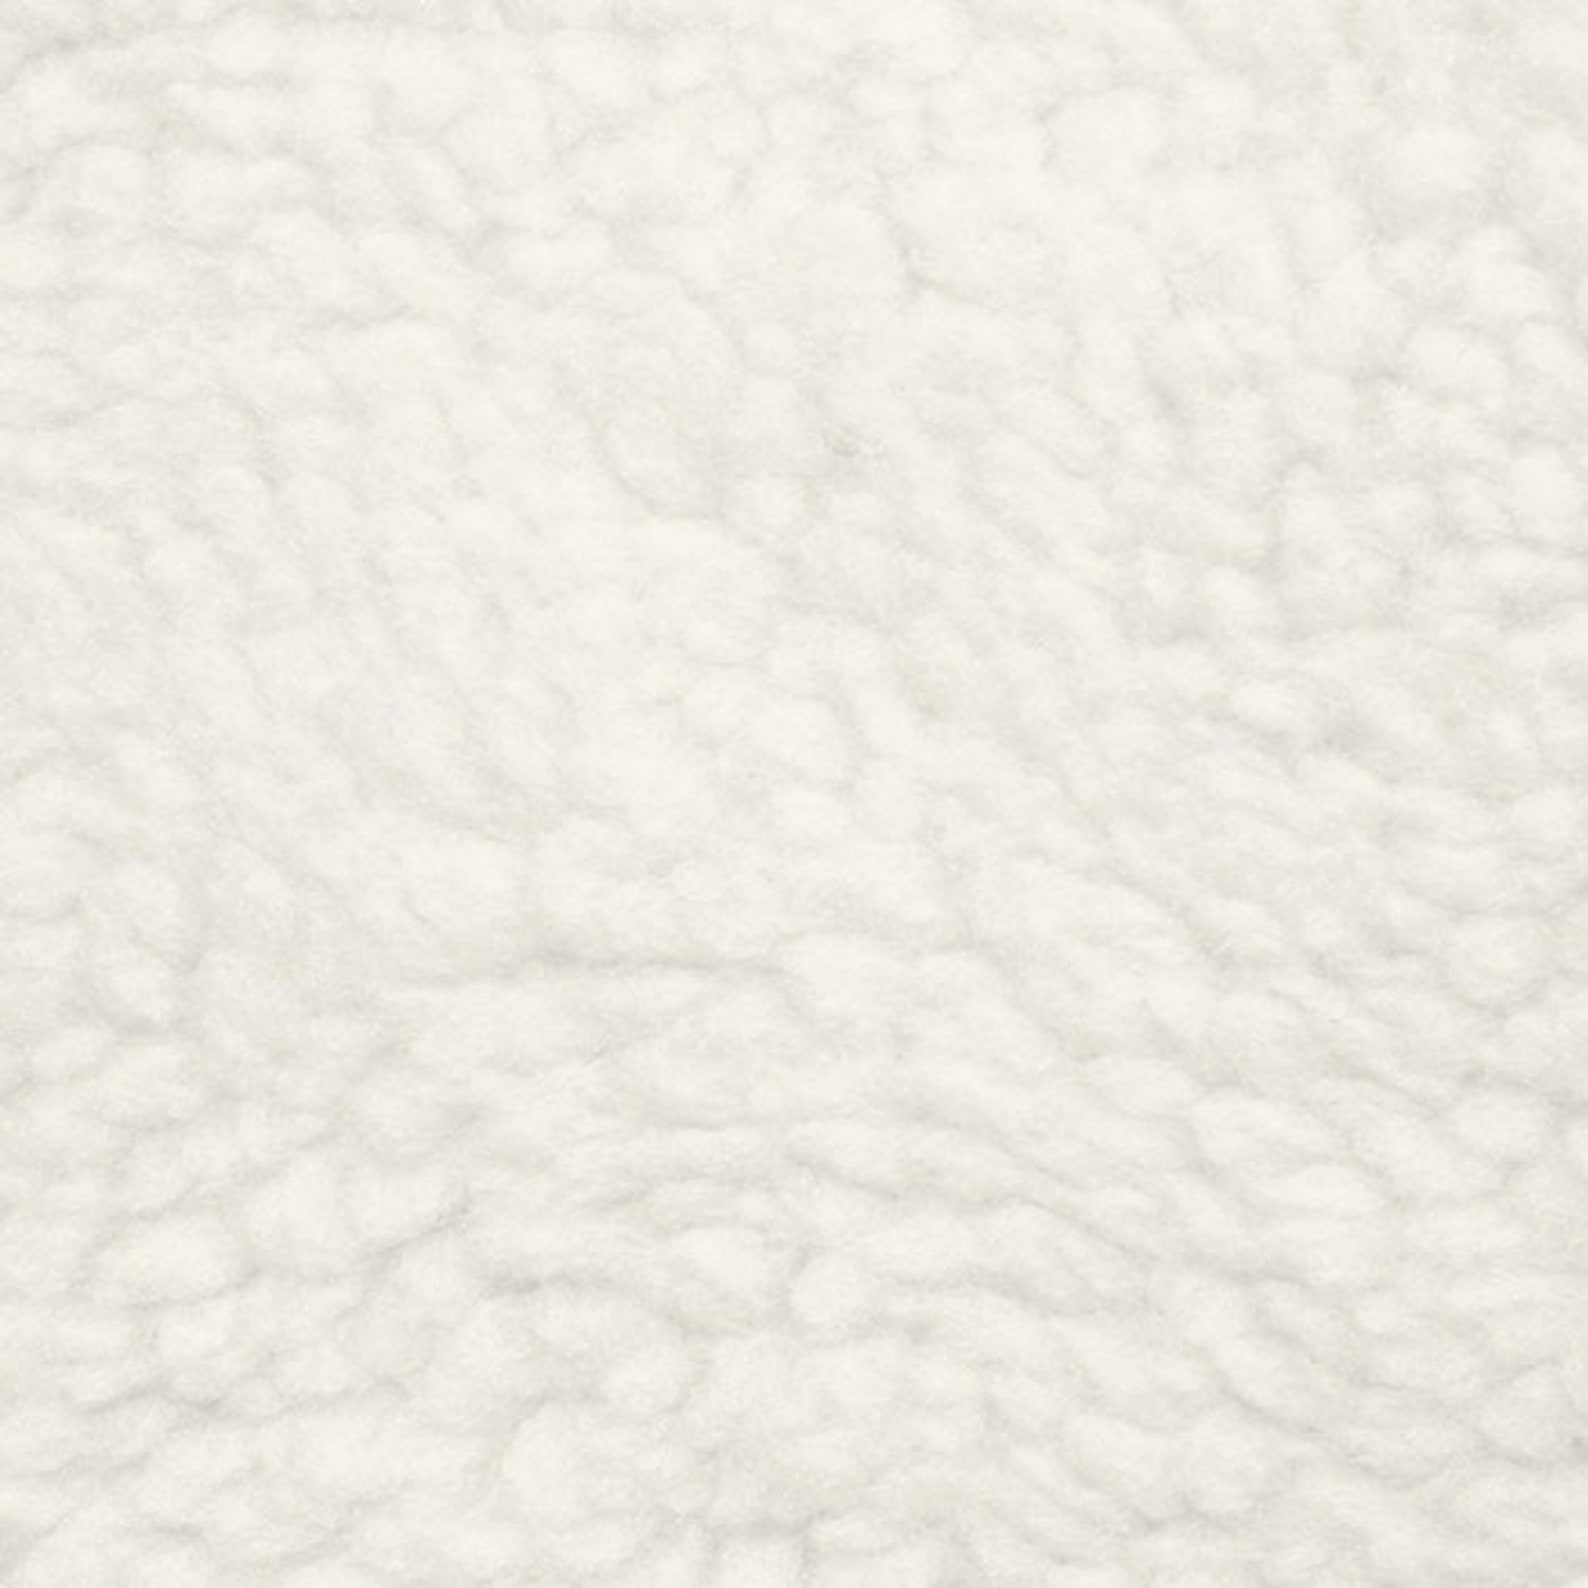 Solid Natural Creamy White Sherpa Plush Fleece Fabric by the | Etsy